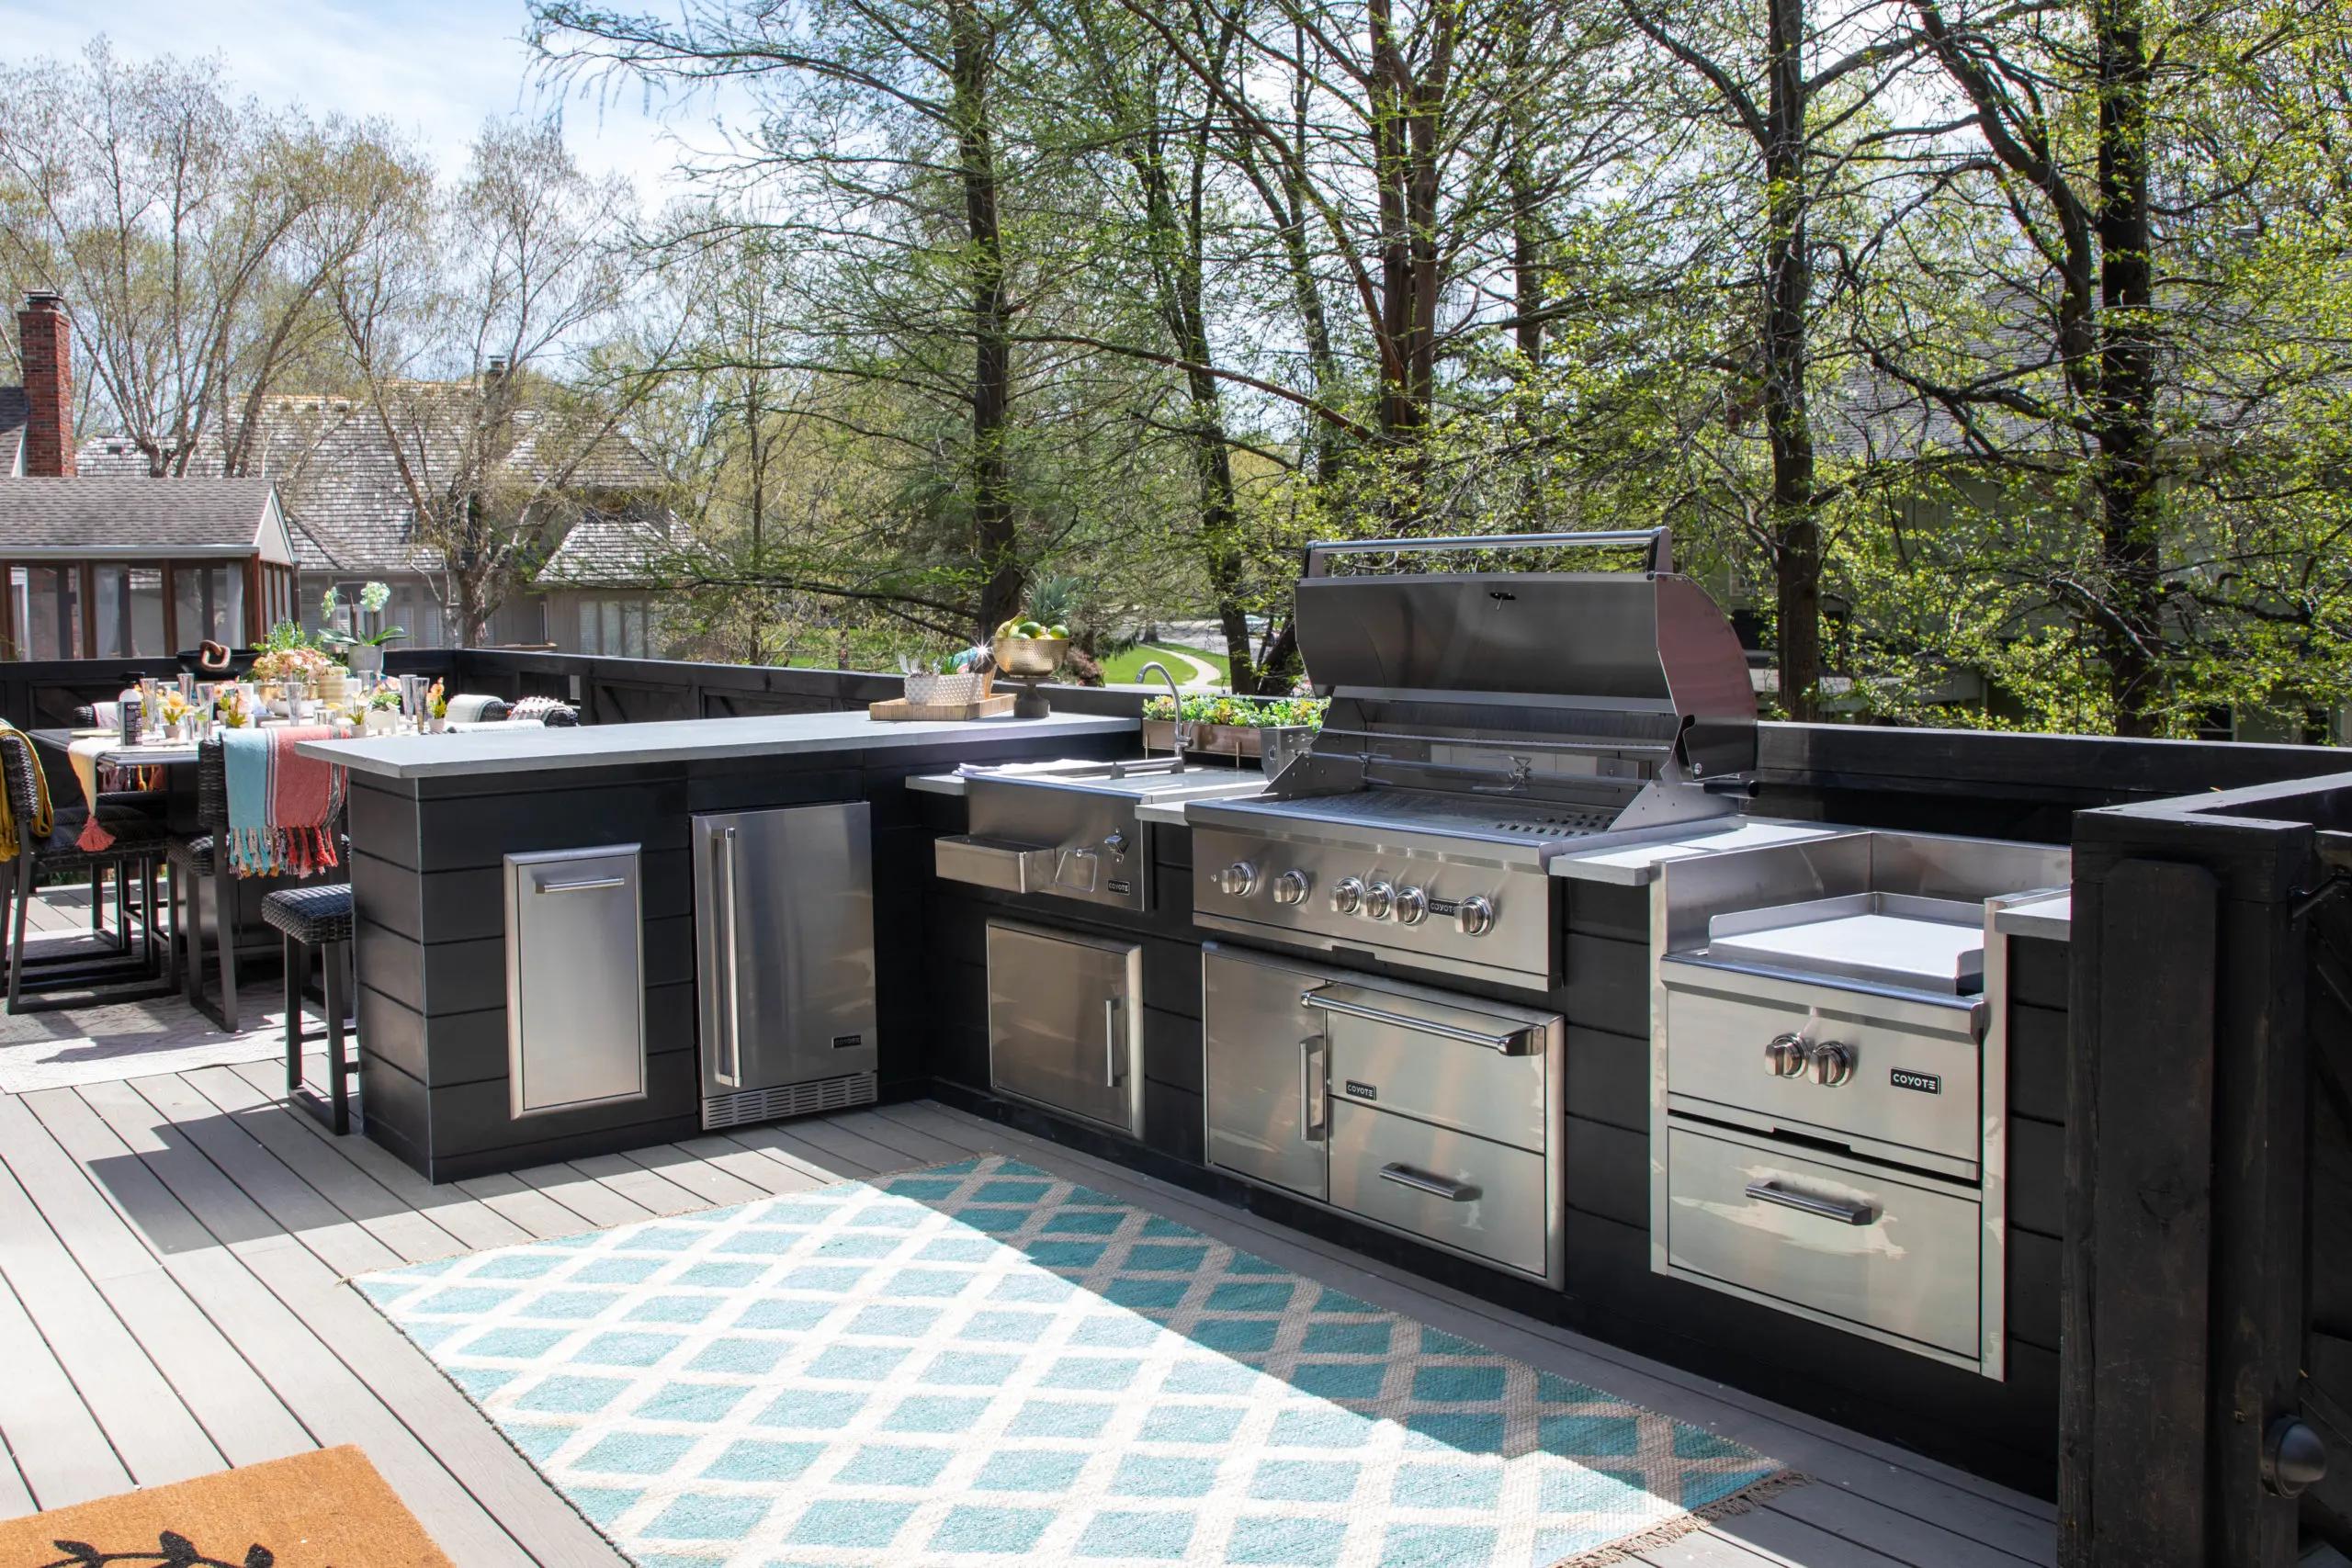 outdoor kitchen ideas with a family grill and sink near a table by the back wall of the house